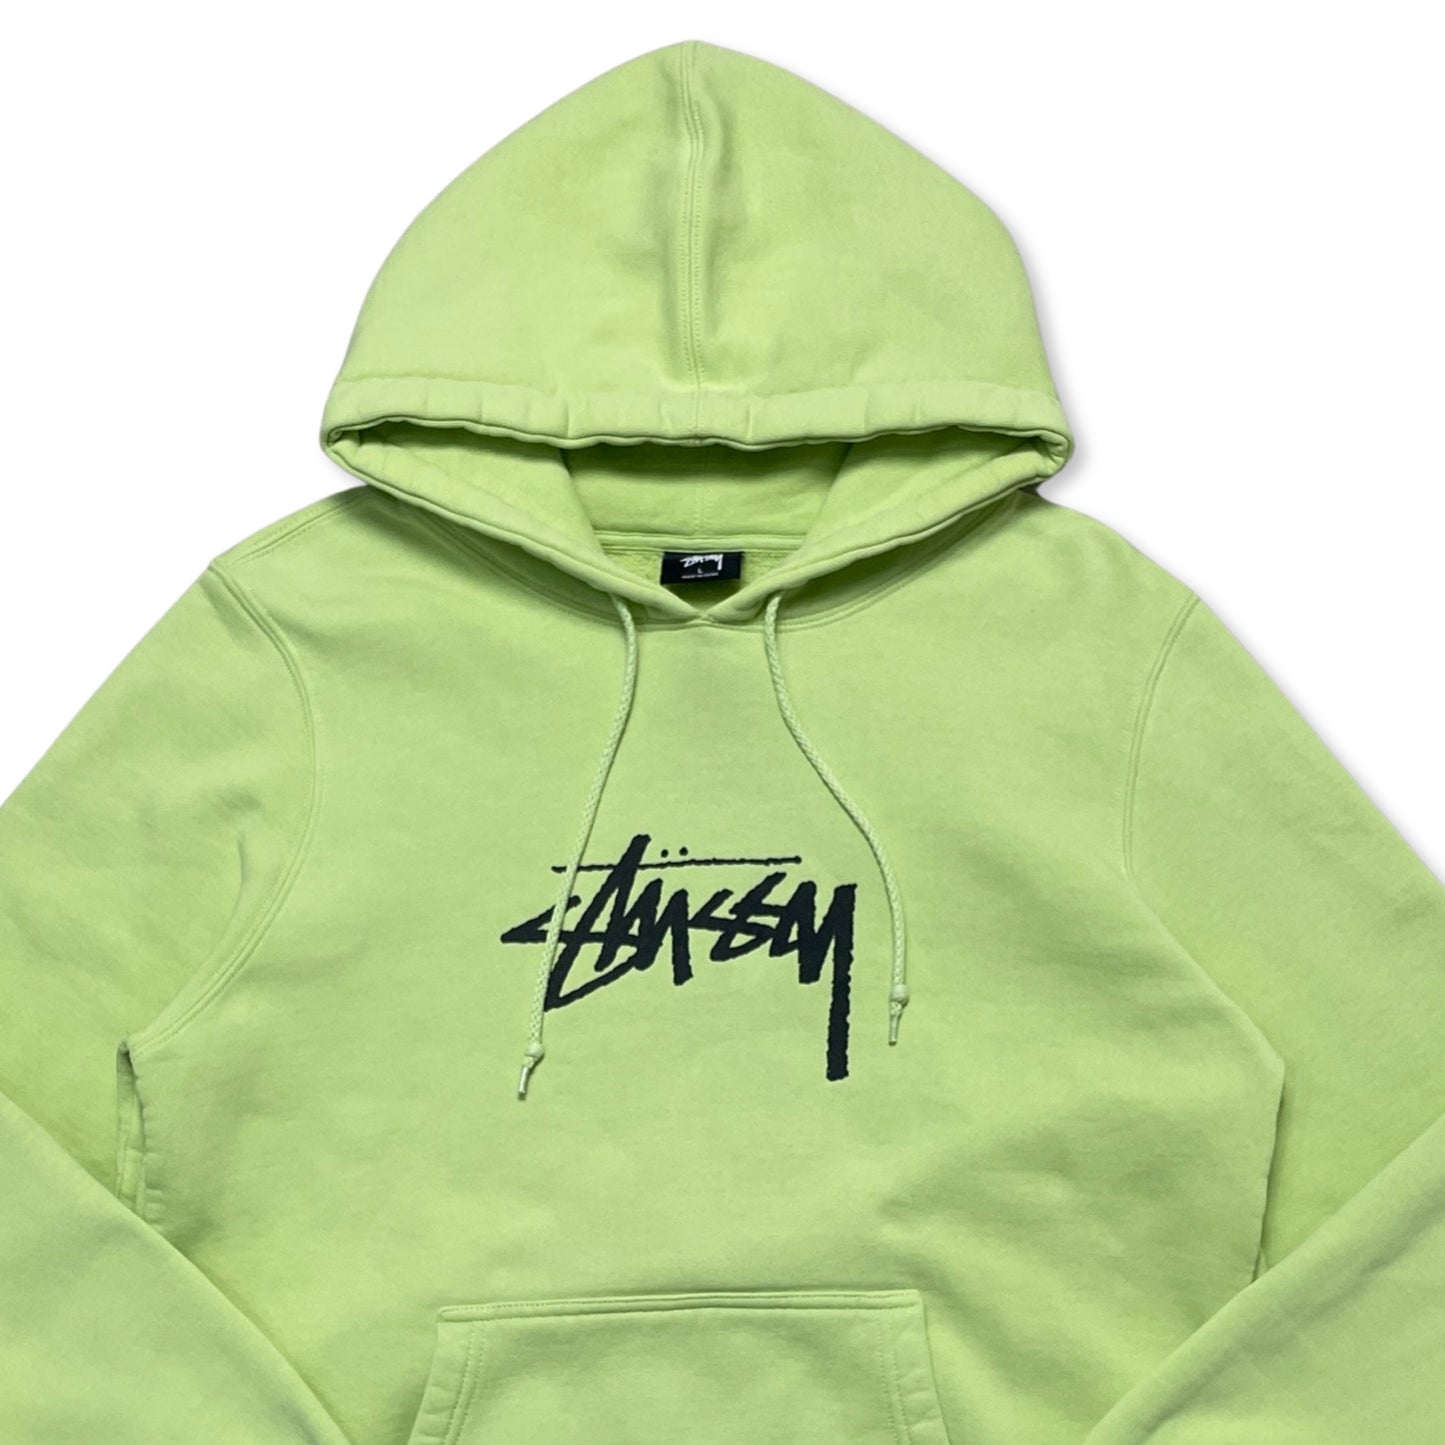 Stussy Spellout Hoodie (Fits Small Men's or Wmn's Large)